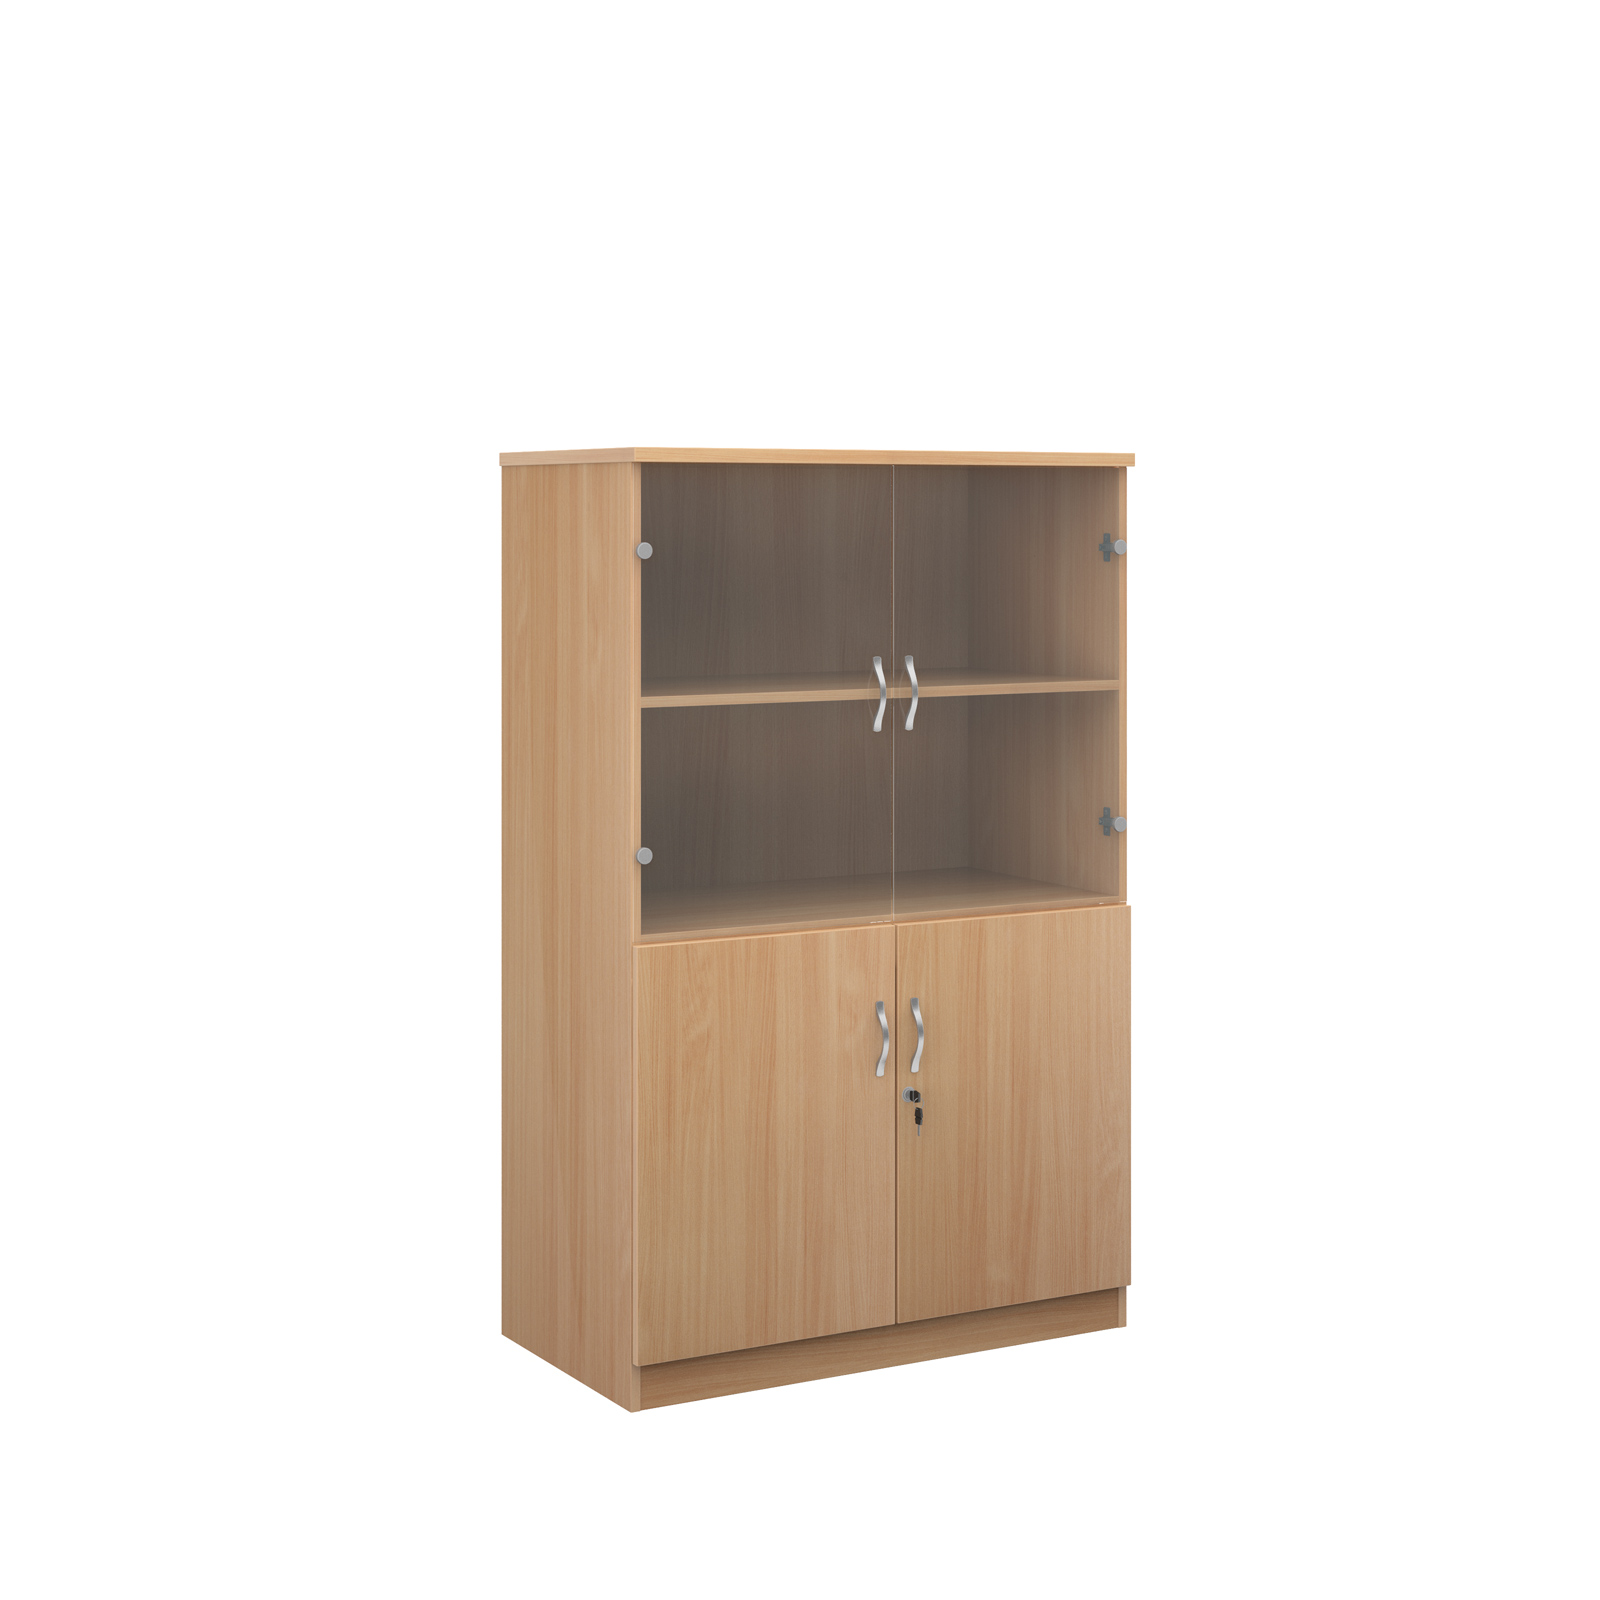 Deluxe combination unit with glass upper doors 1600mm high with 3 shelves - beech